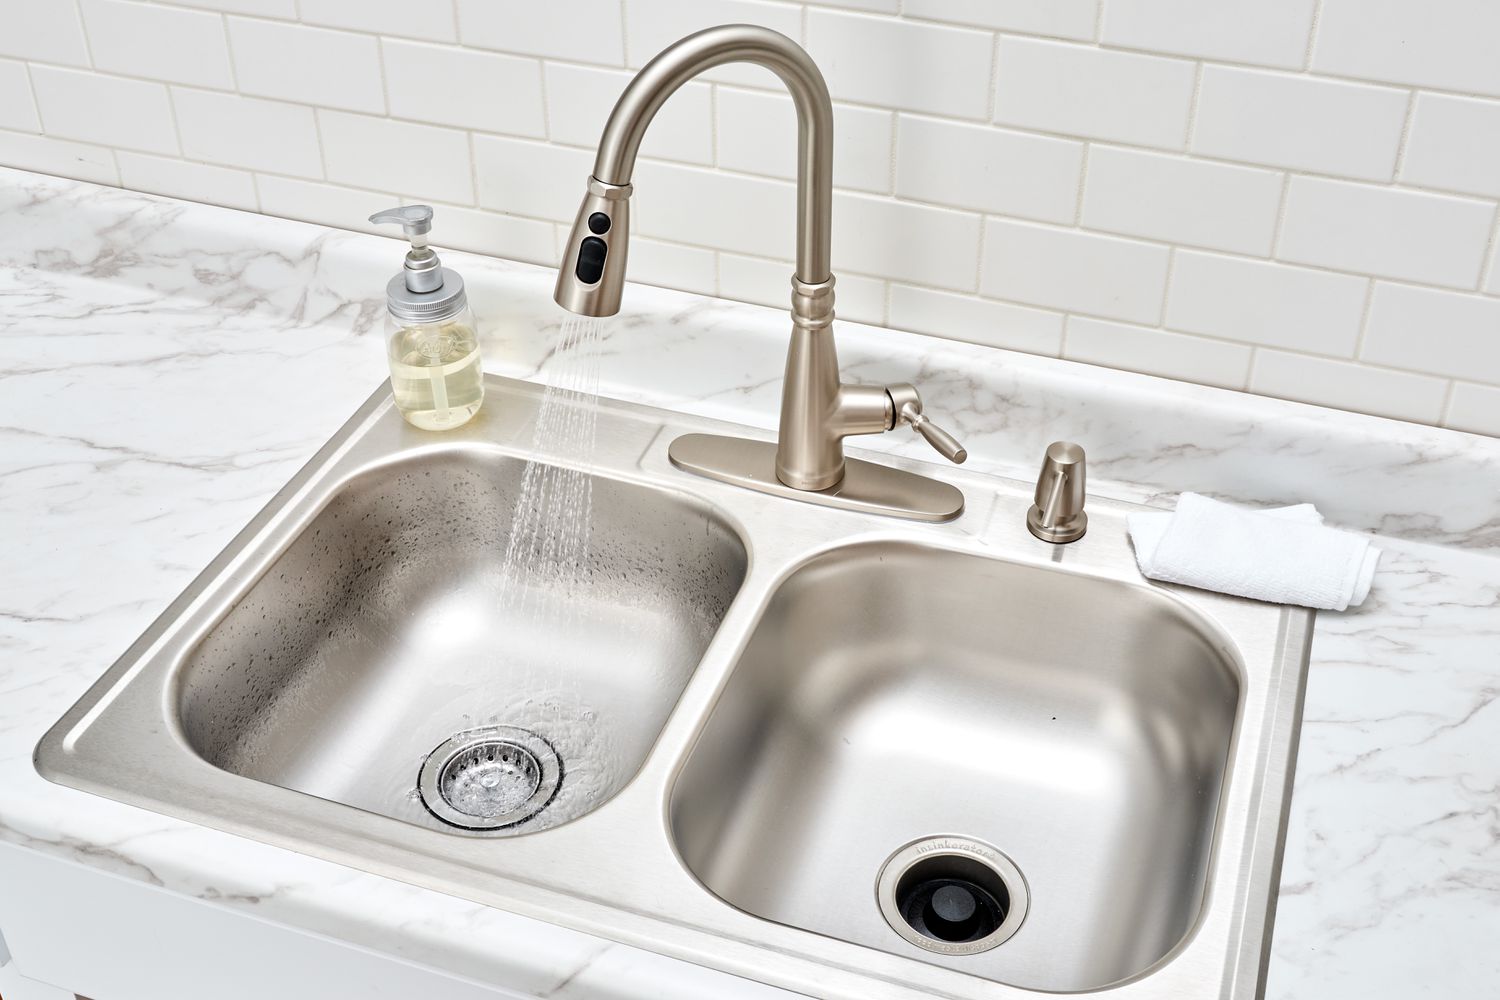 How To Install A Drop-In Kitchen Sink